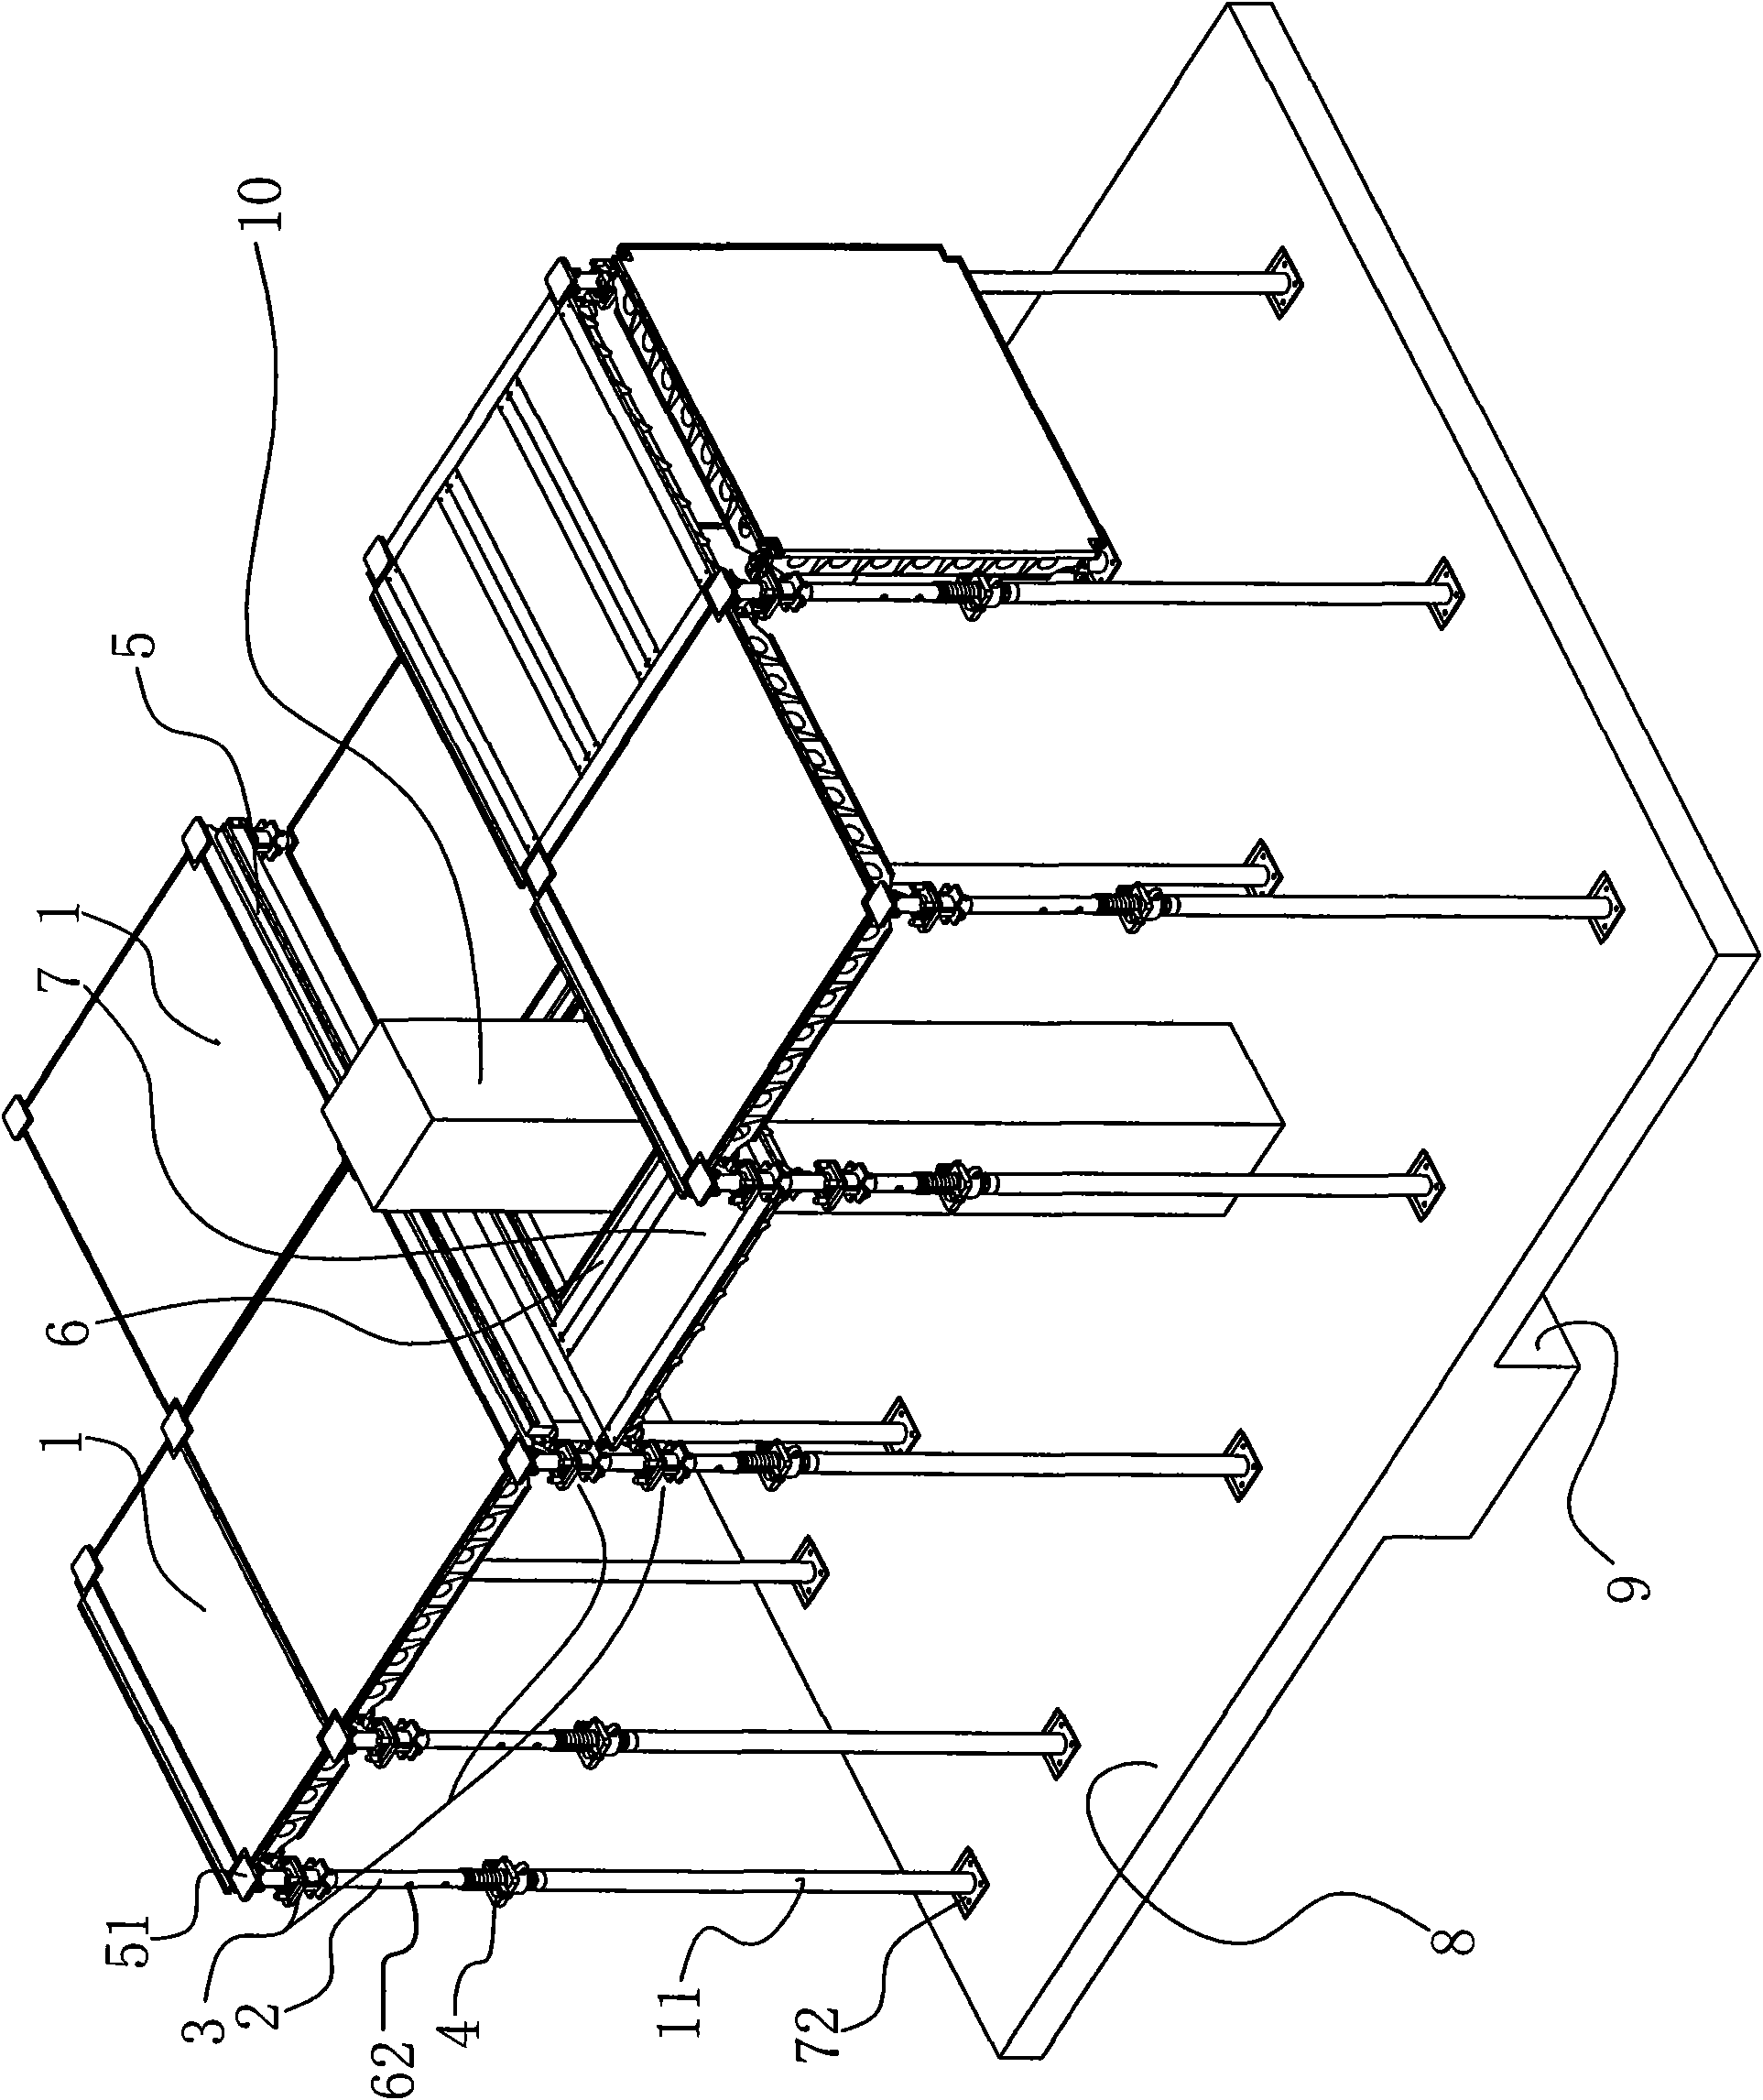 Early-demounting template system applied to building containing beam, plate and column structure on floor slab